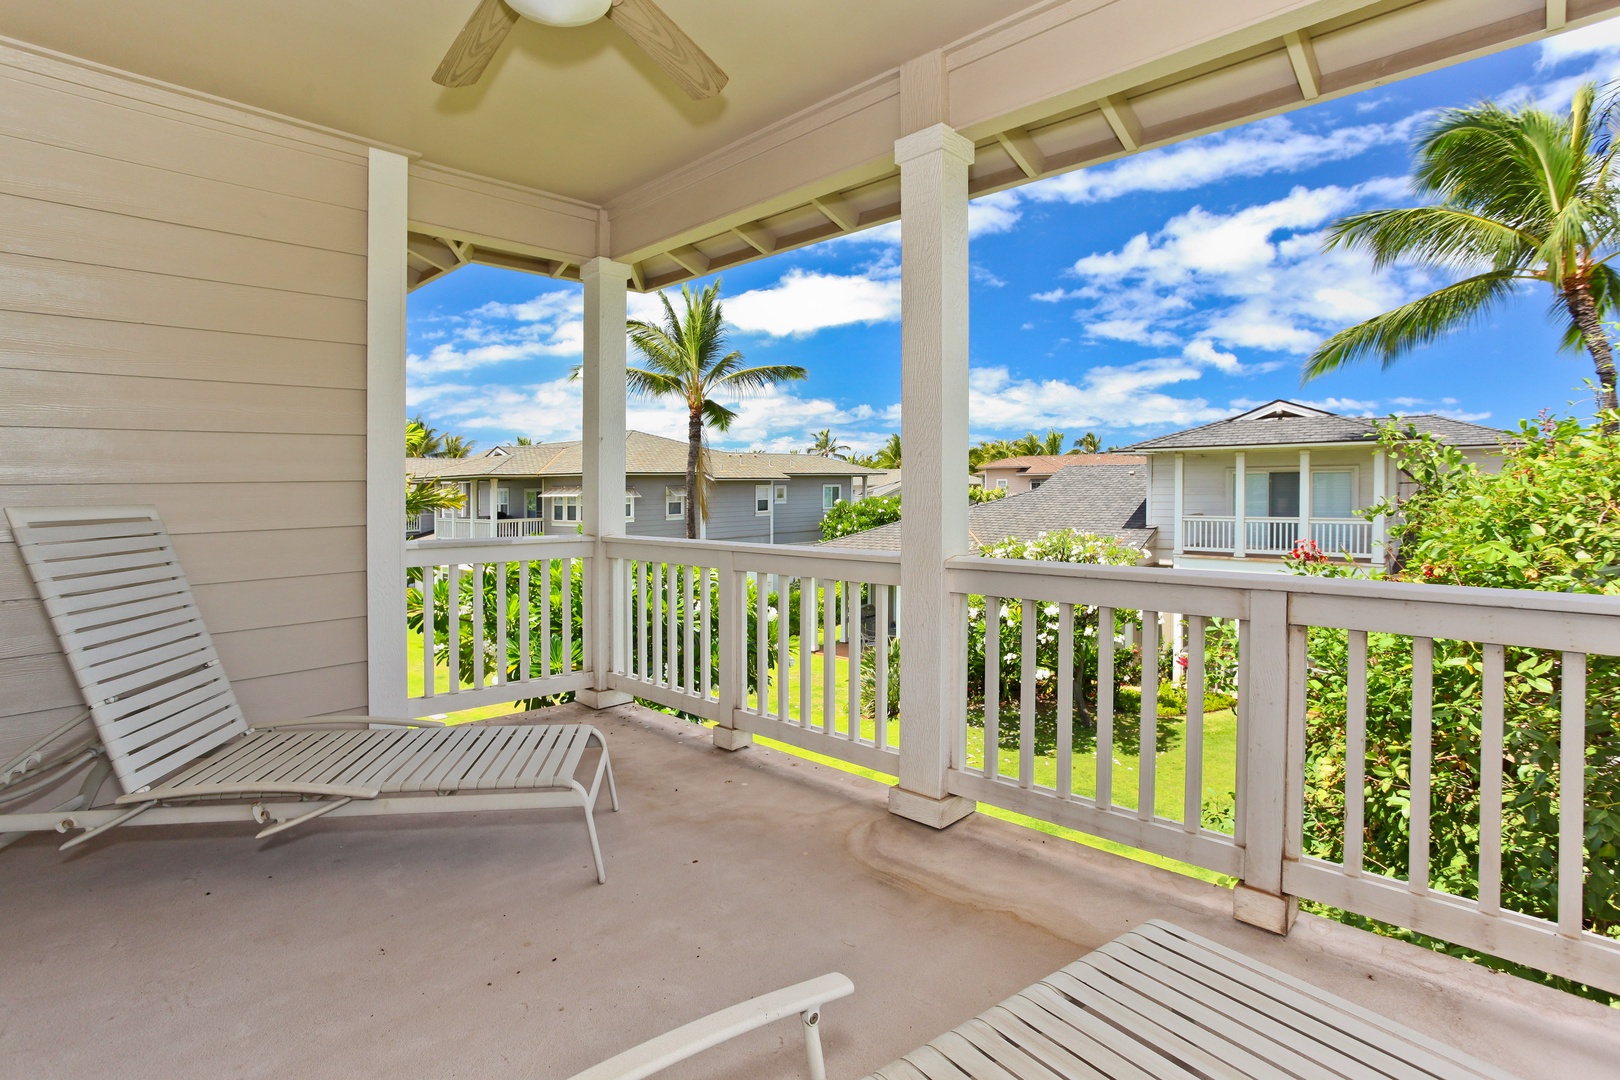 Kapolei Vacation Rentals, Coconut Plantation 1174-2 - The upstairs lanai with lounge chairs and panoramic scenery.